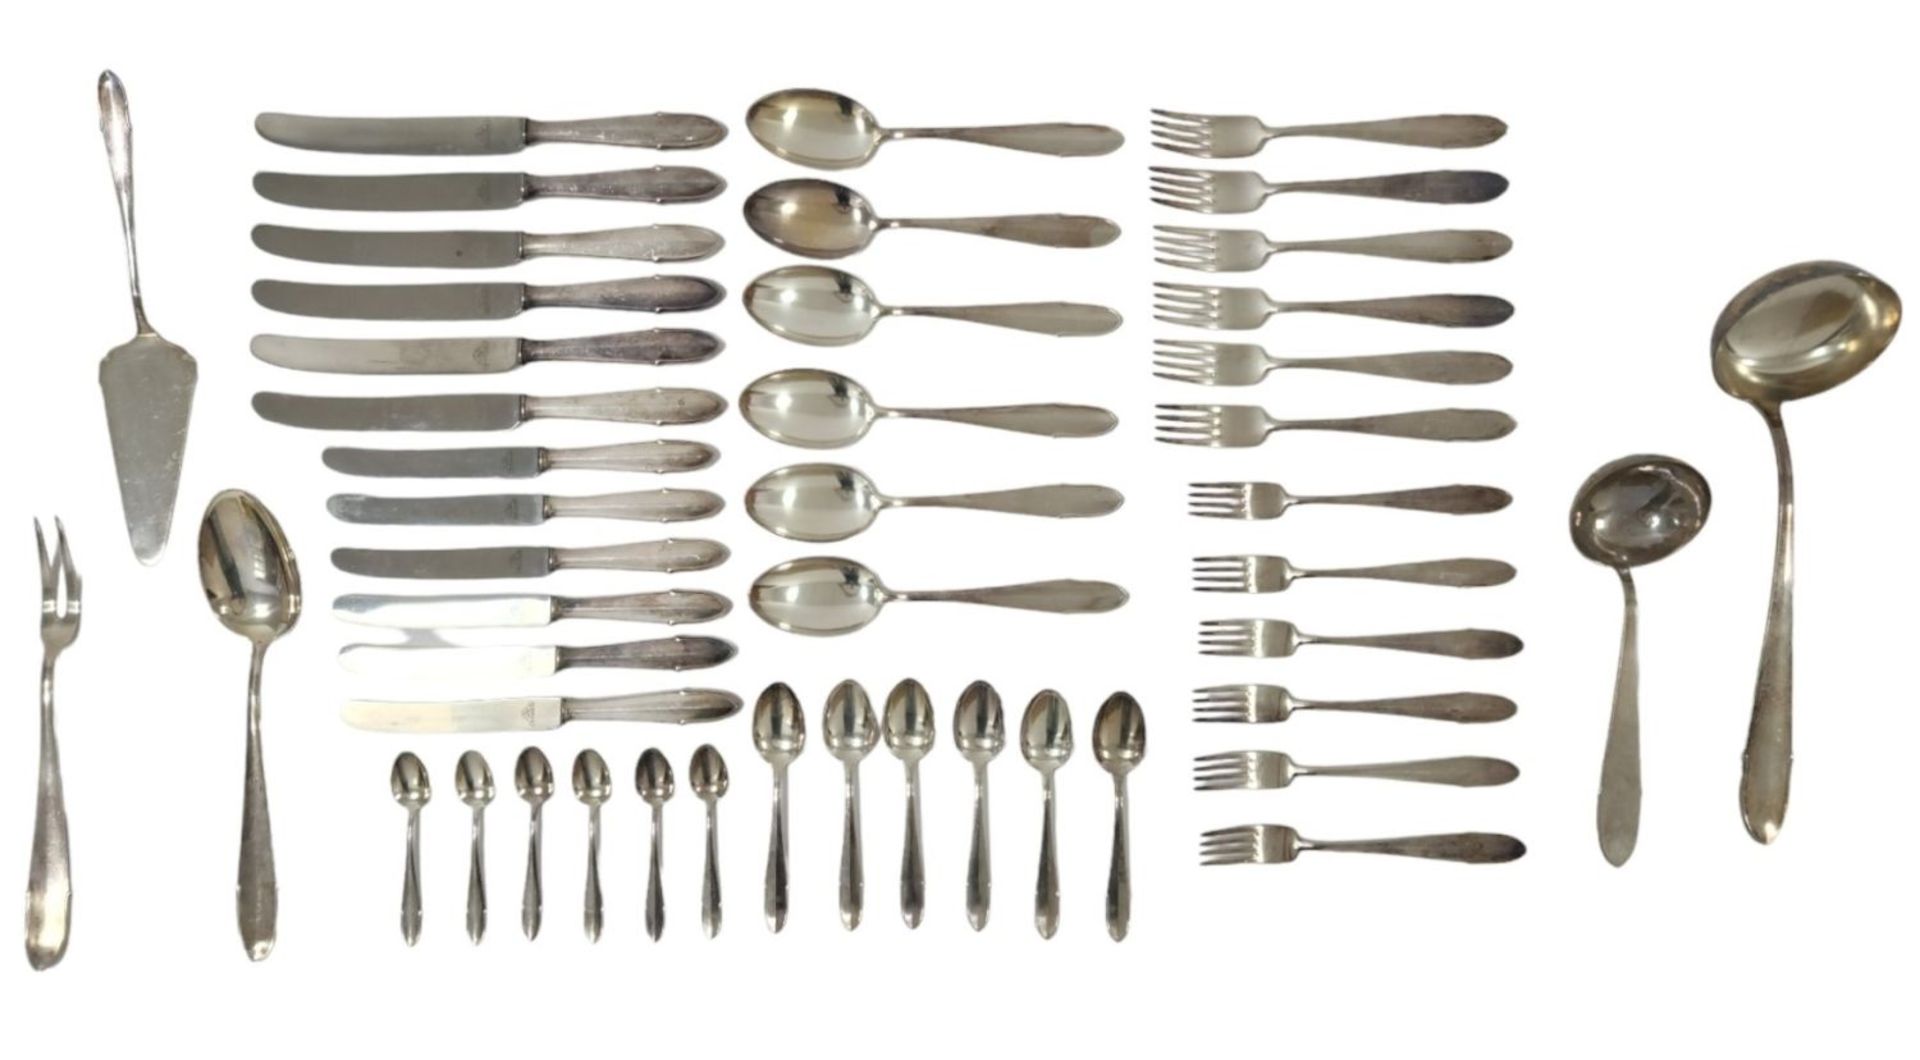 Parts of a German cutlery set, made by 'WMF', made of '800' silver, signed, total weight (without